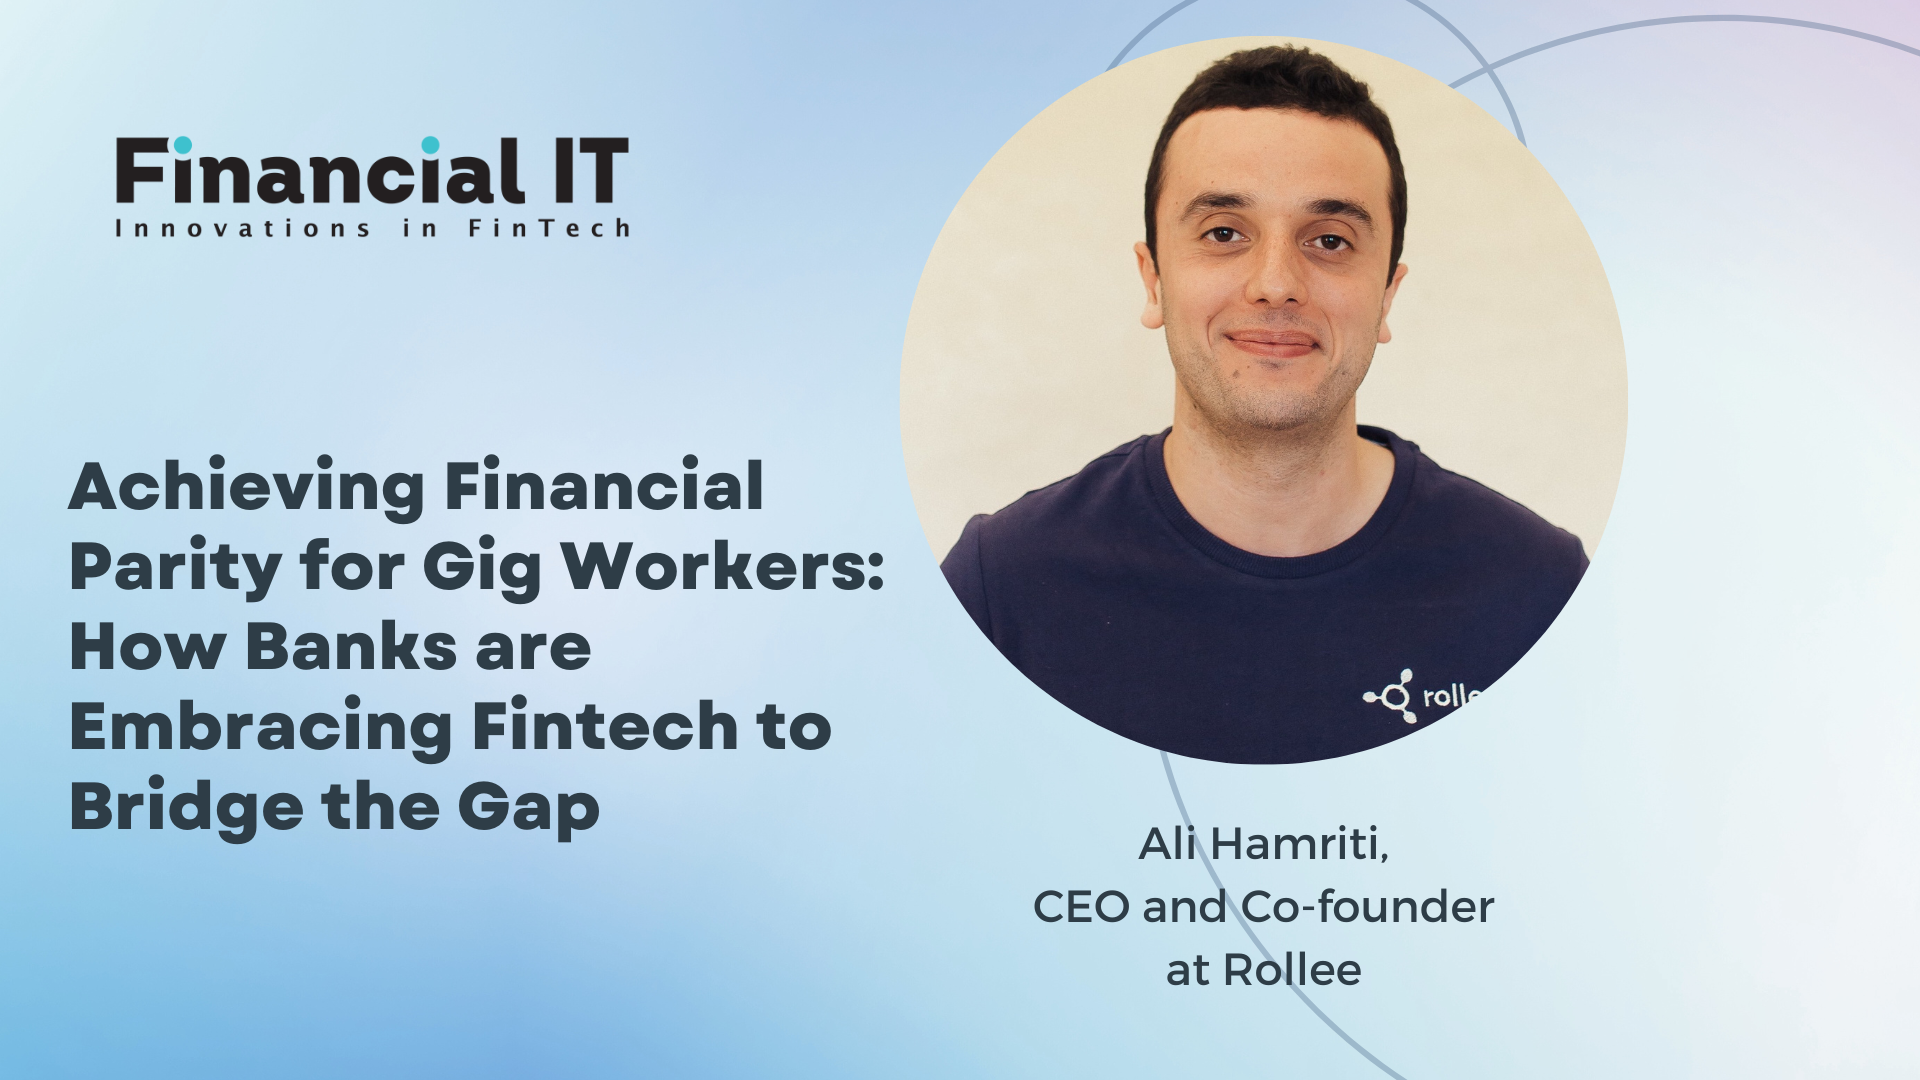 Achieving Financial Parity for Gig Workers: How Banks are Embracing Fintech to Bridge the Gap